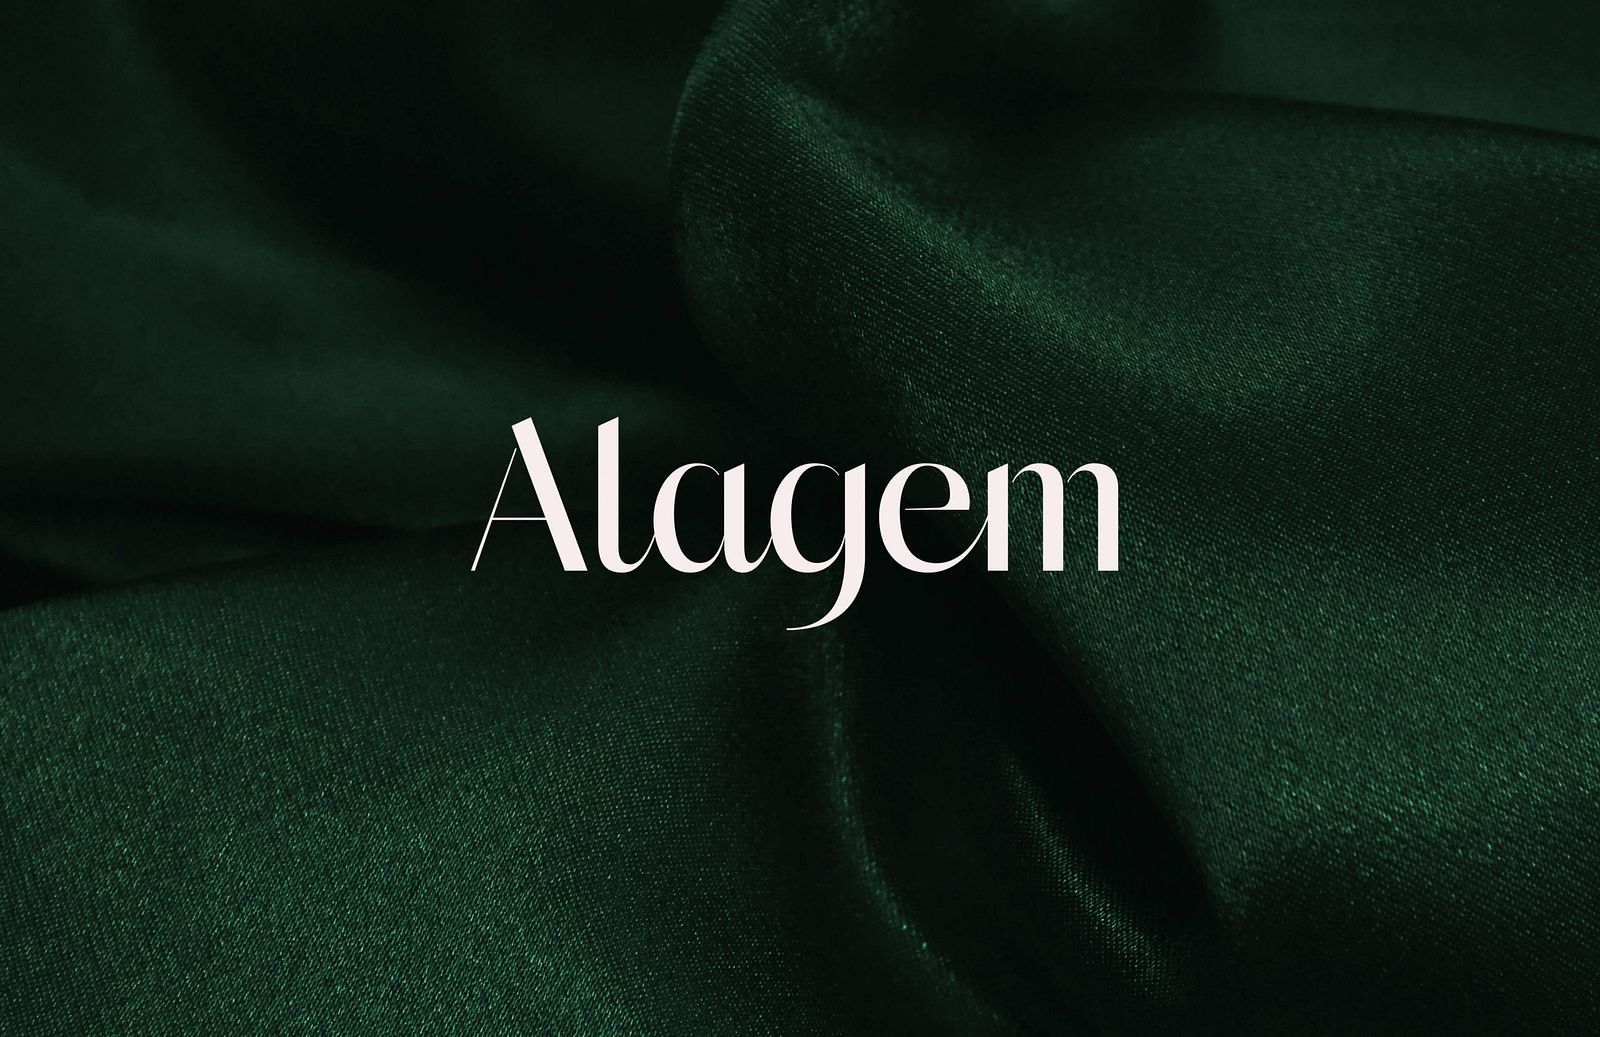 White Alagem logo place on top of an image of green fabric scrunched up.